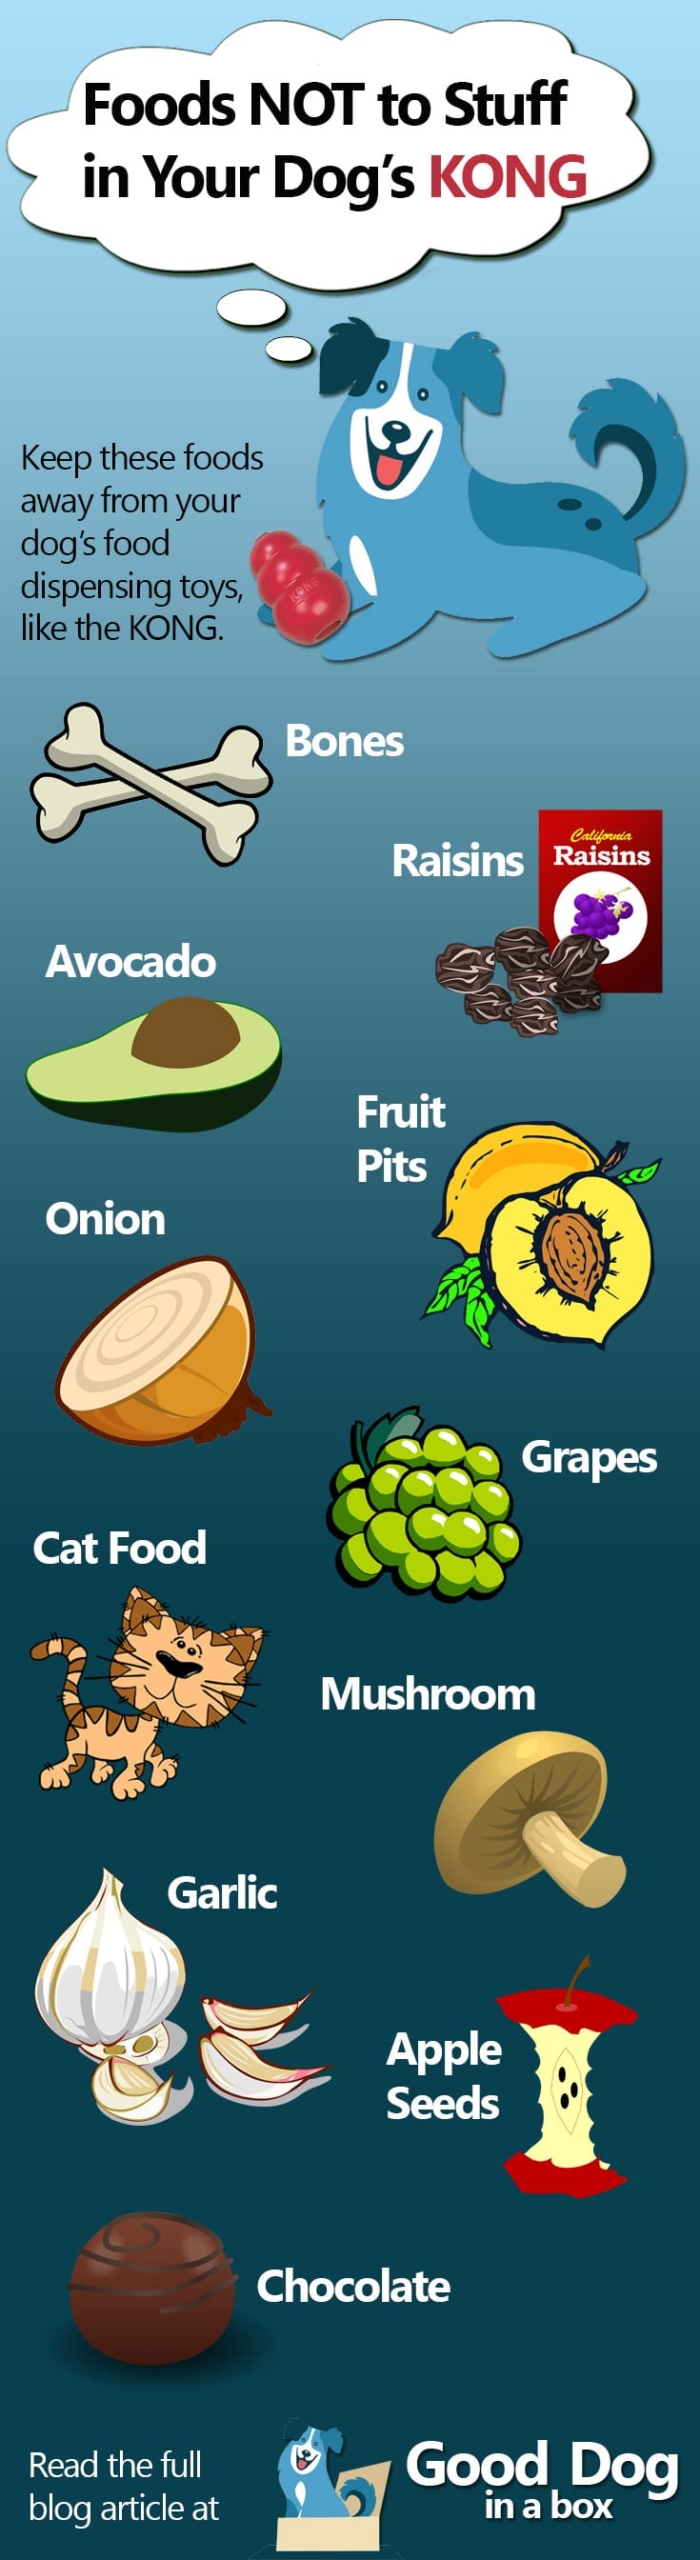 Foods Not to Stuff in Your Dog's Kong Infographic